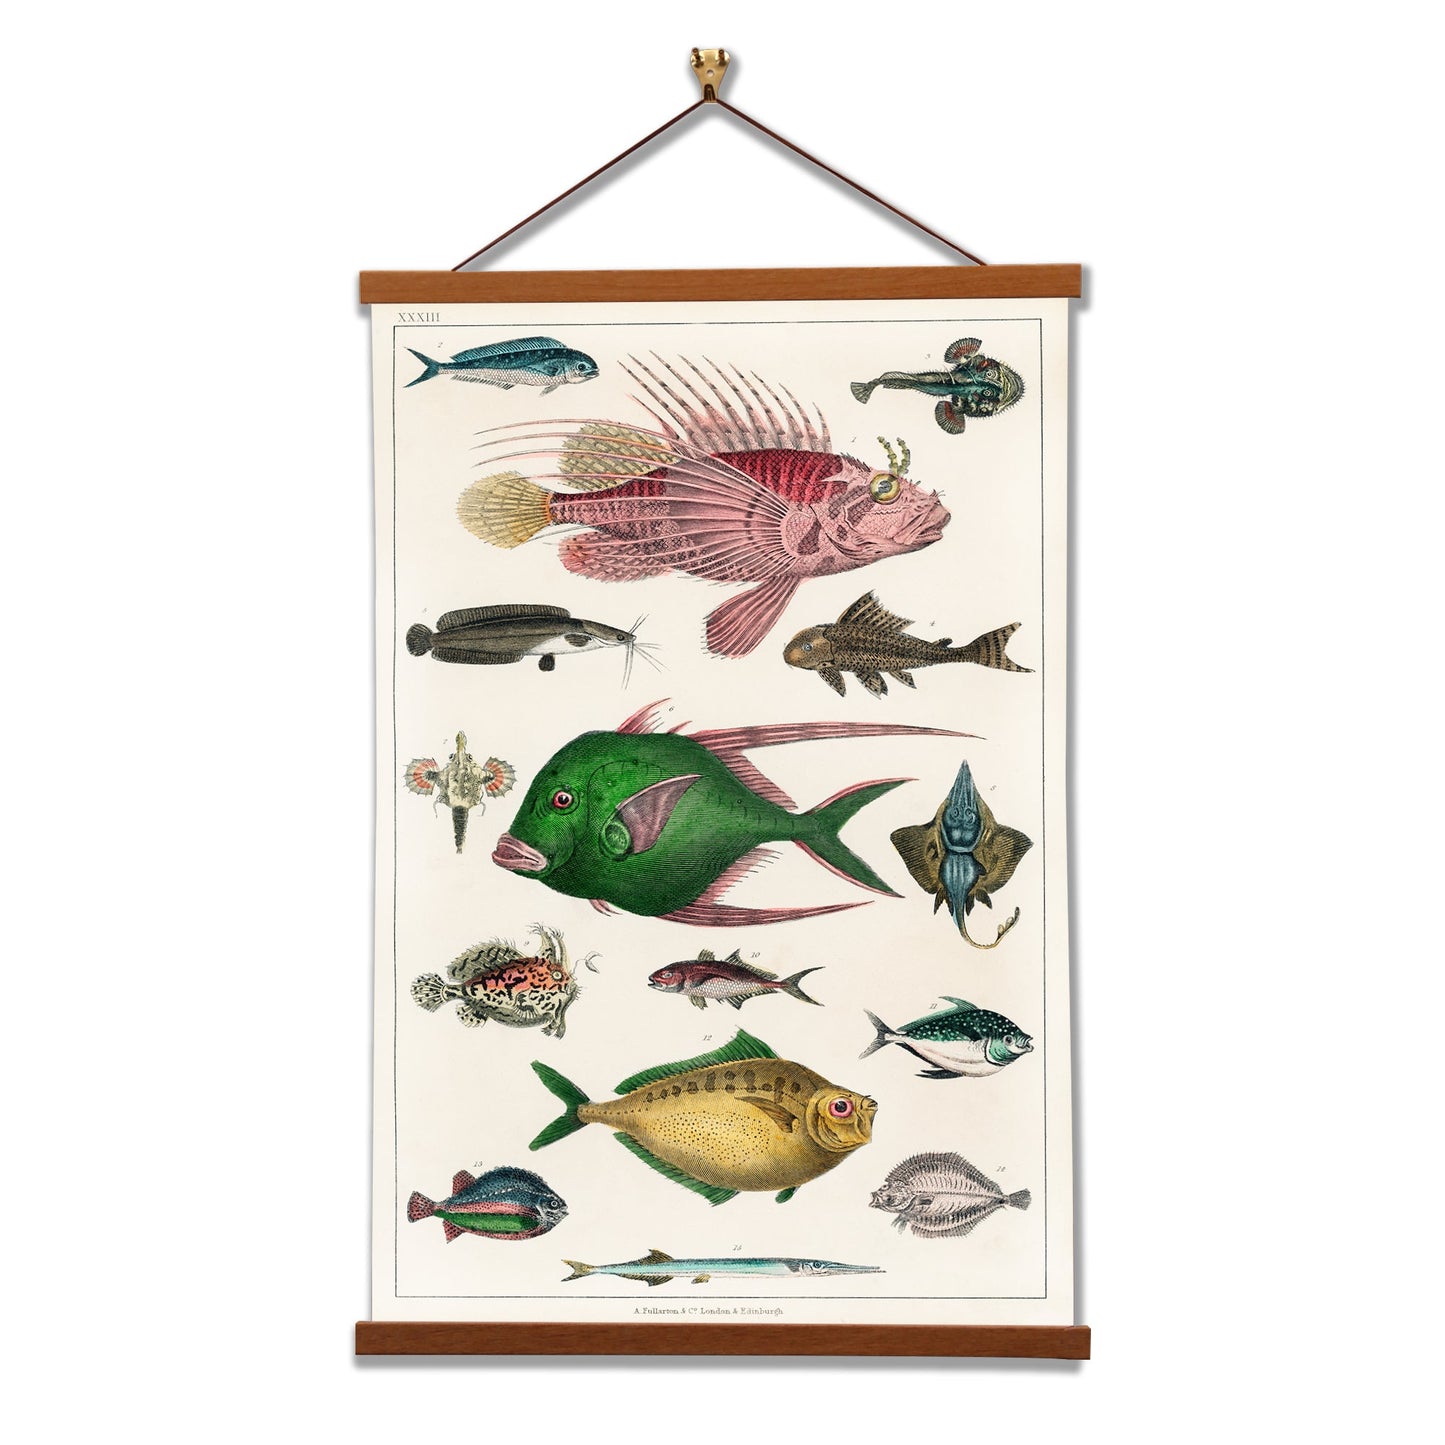 Collection of various fishes (No. 33) by Oliver Goldsmith